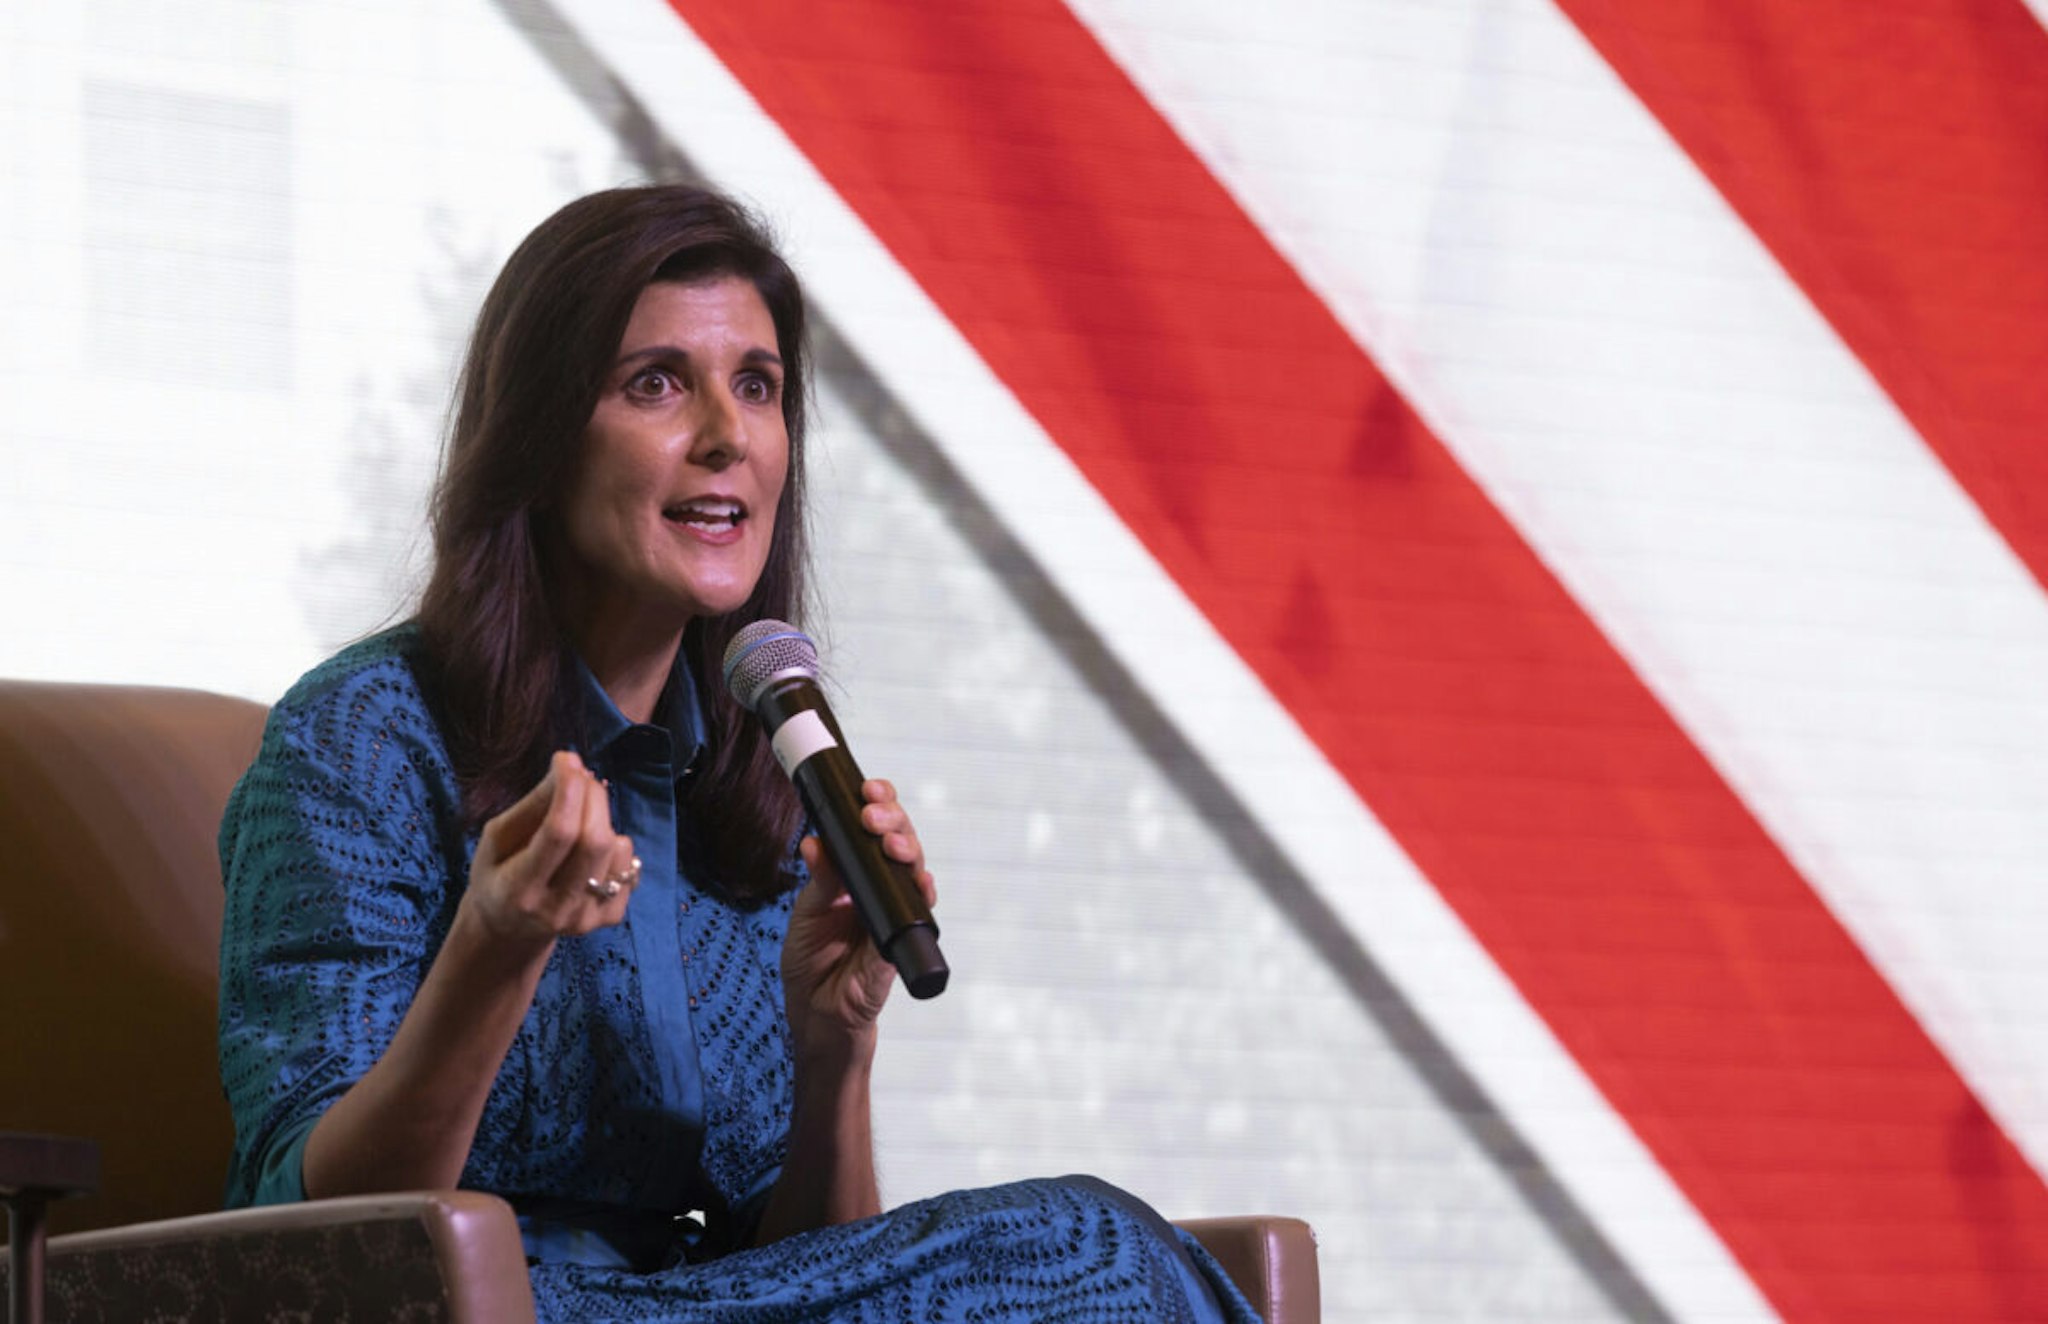 Nikki Haley, former ambassador to the United Nations, speaks during the Palmetto Family Council's Vision 24 national conservative policy forum in North Charleston, South Carolina, US, on Saturday, March 18, 2023.